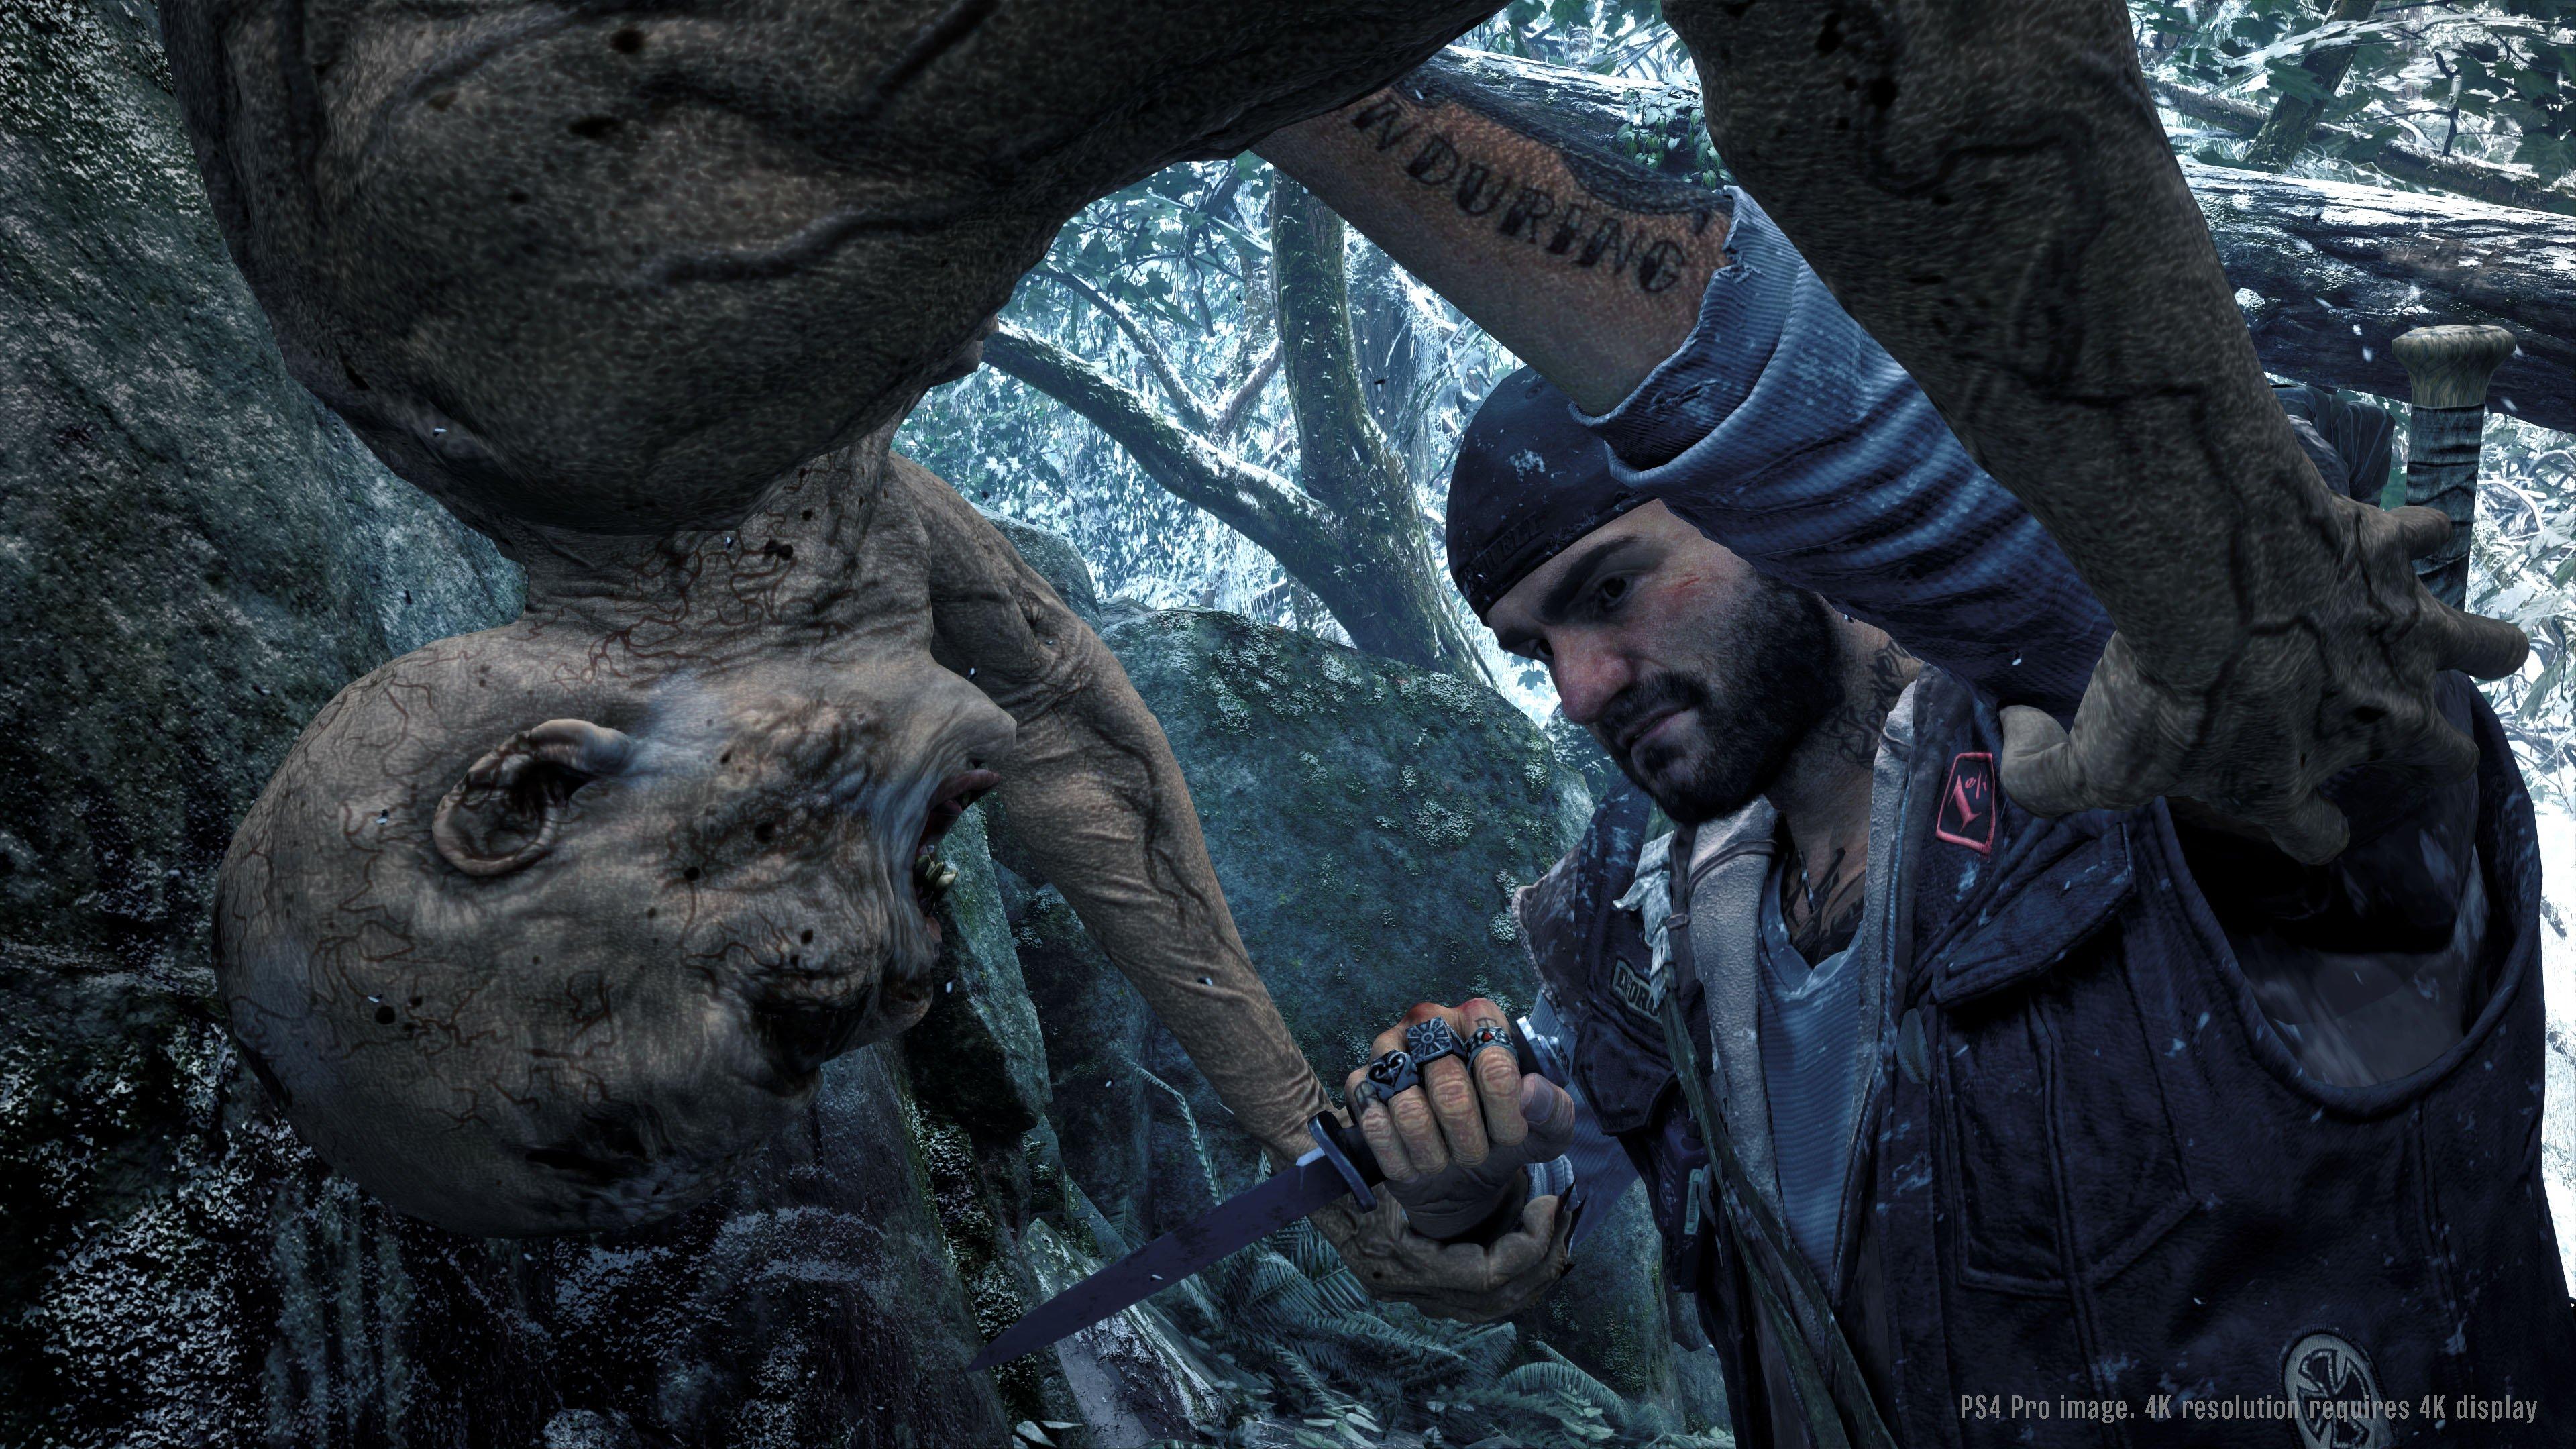 Buy Days Gone PS5 Compare Prices